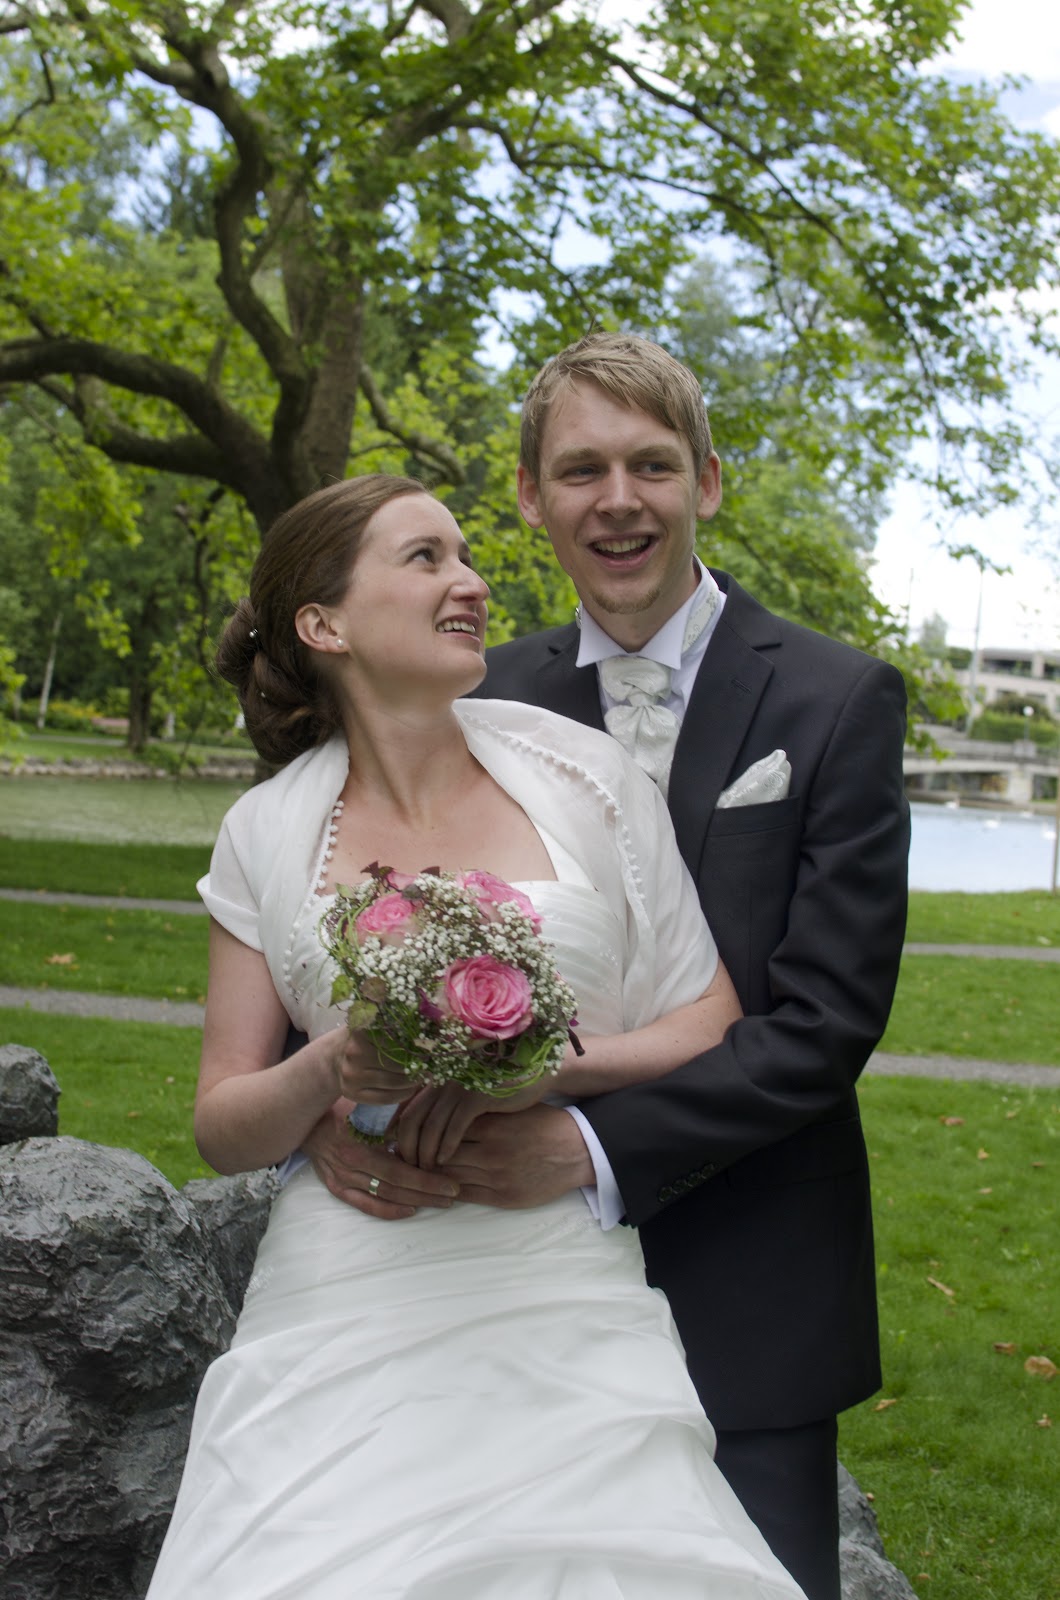 yvonne & anders: Photosession at the 